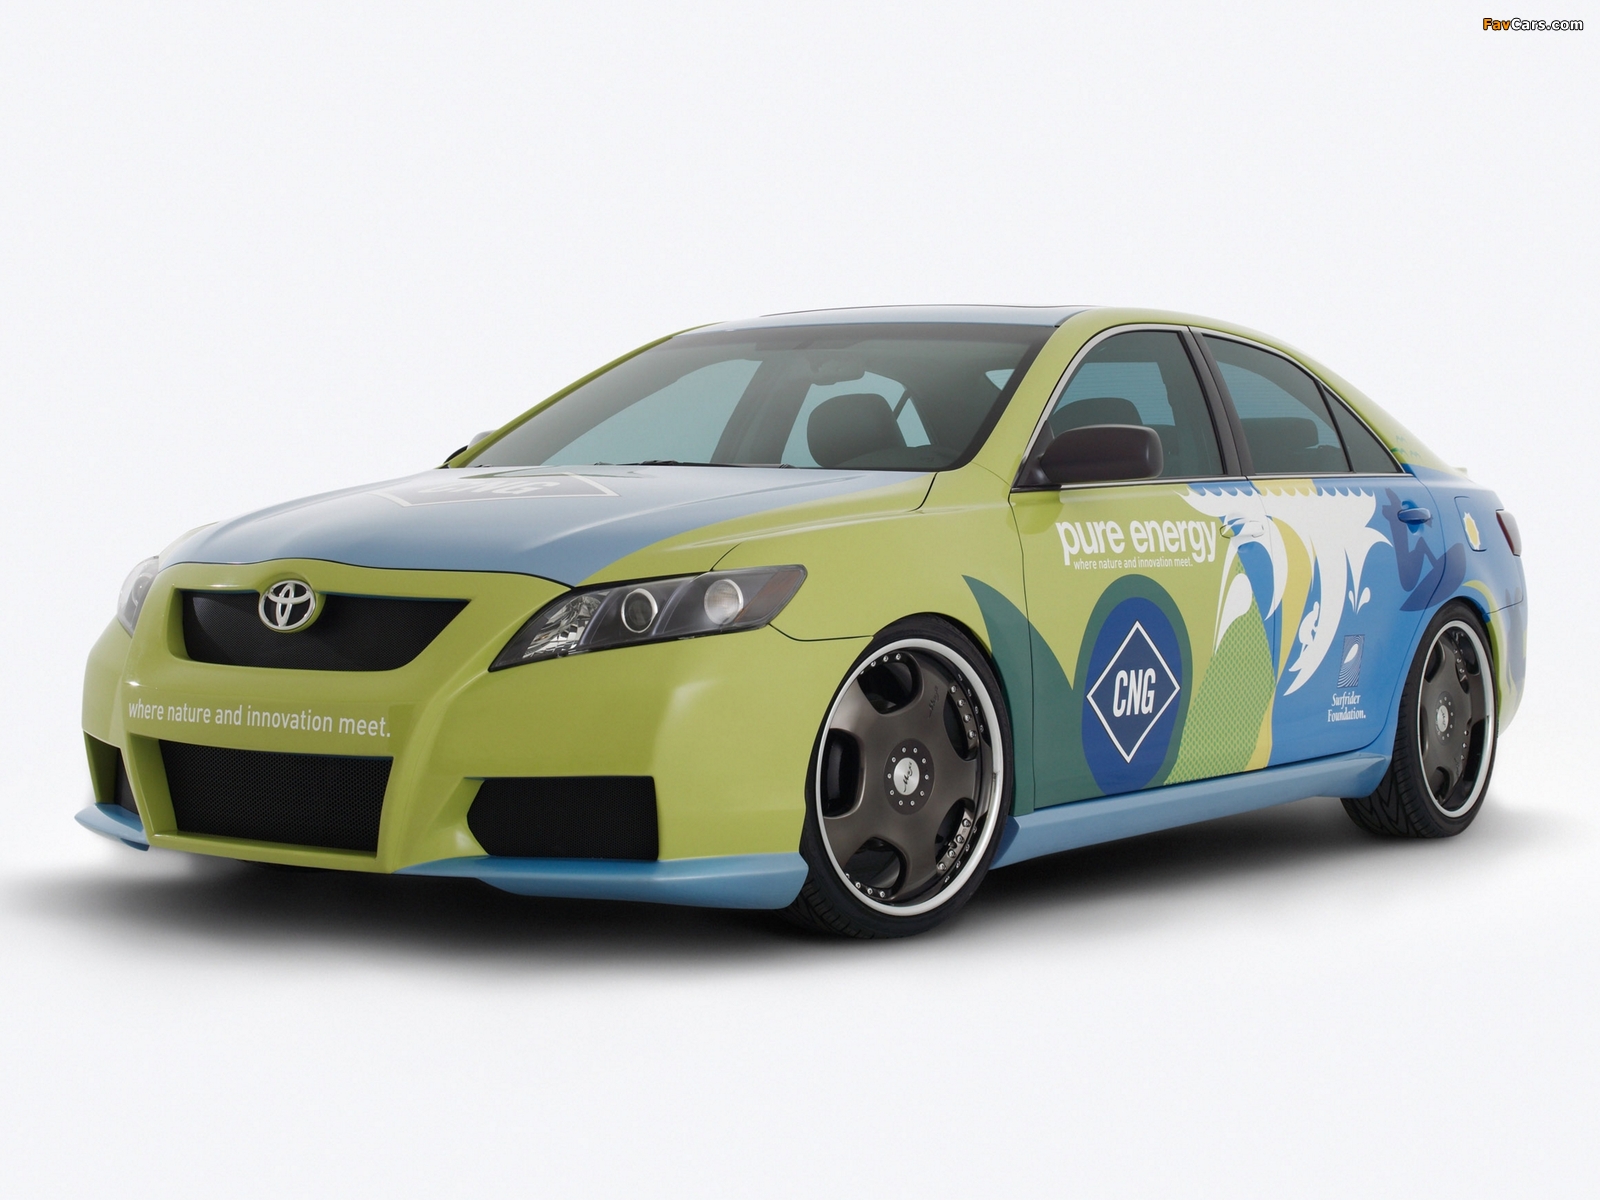 Toyota Surfrider Camry CNG Hybrid Concept 2009 pictures (1600 x 1200)